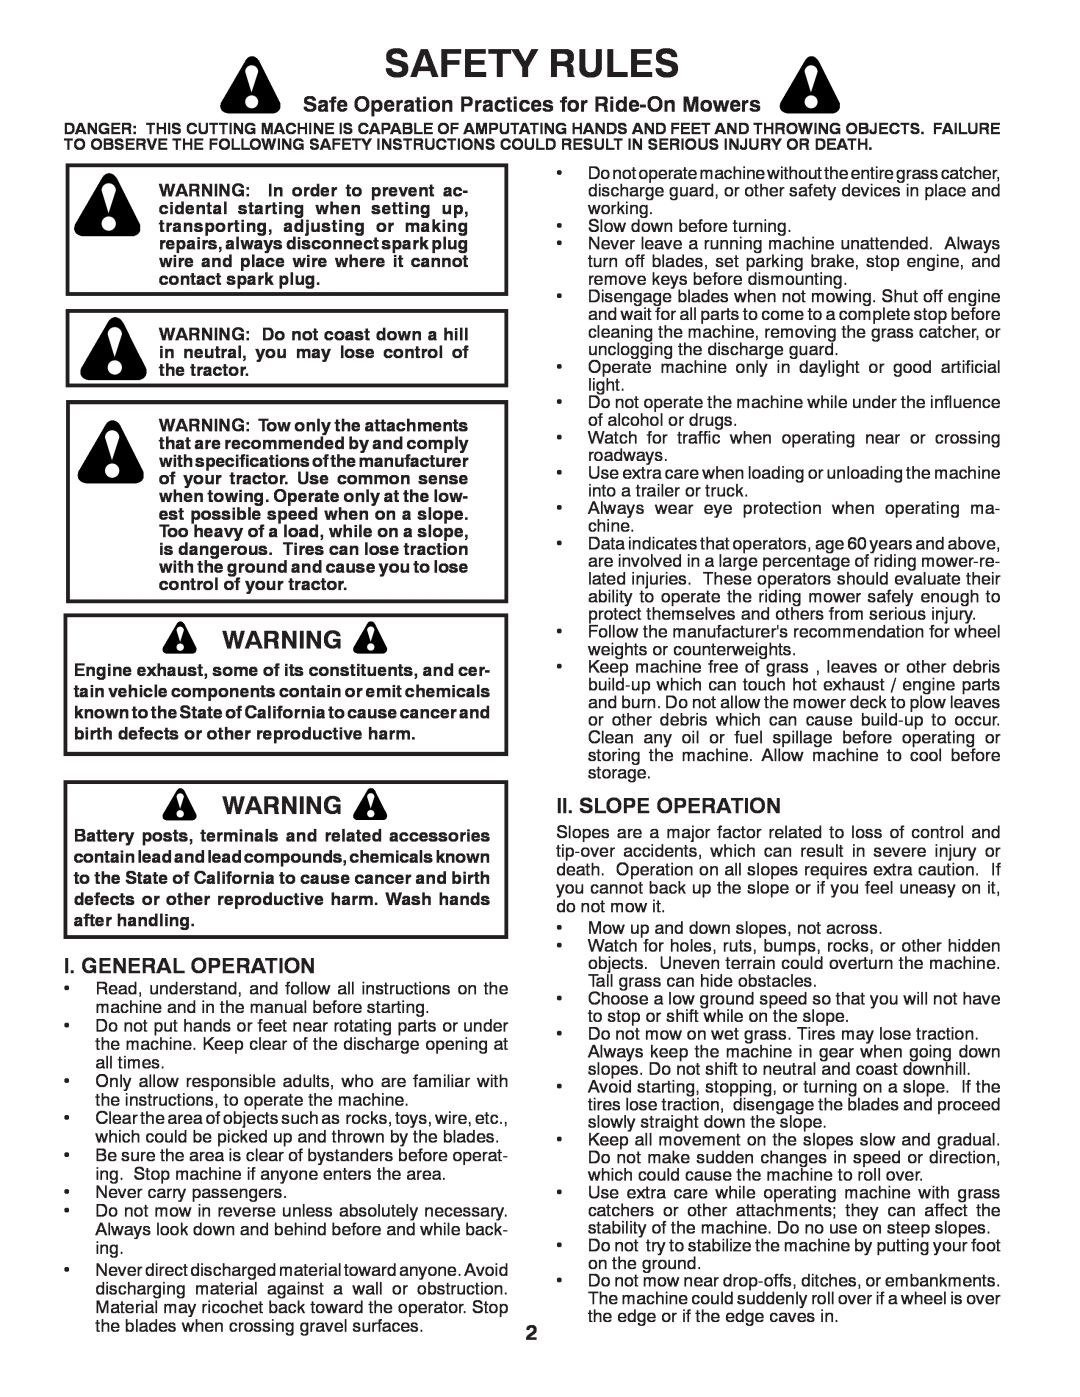 Husqvarna 2748 GLS (CA) manual Safety Rules, Safe Operation Practices for Ride-OnMowers, I. General Operation 